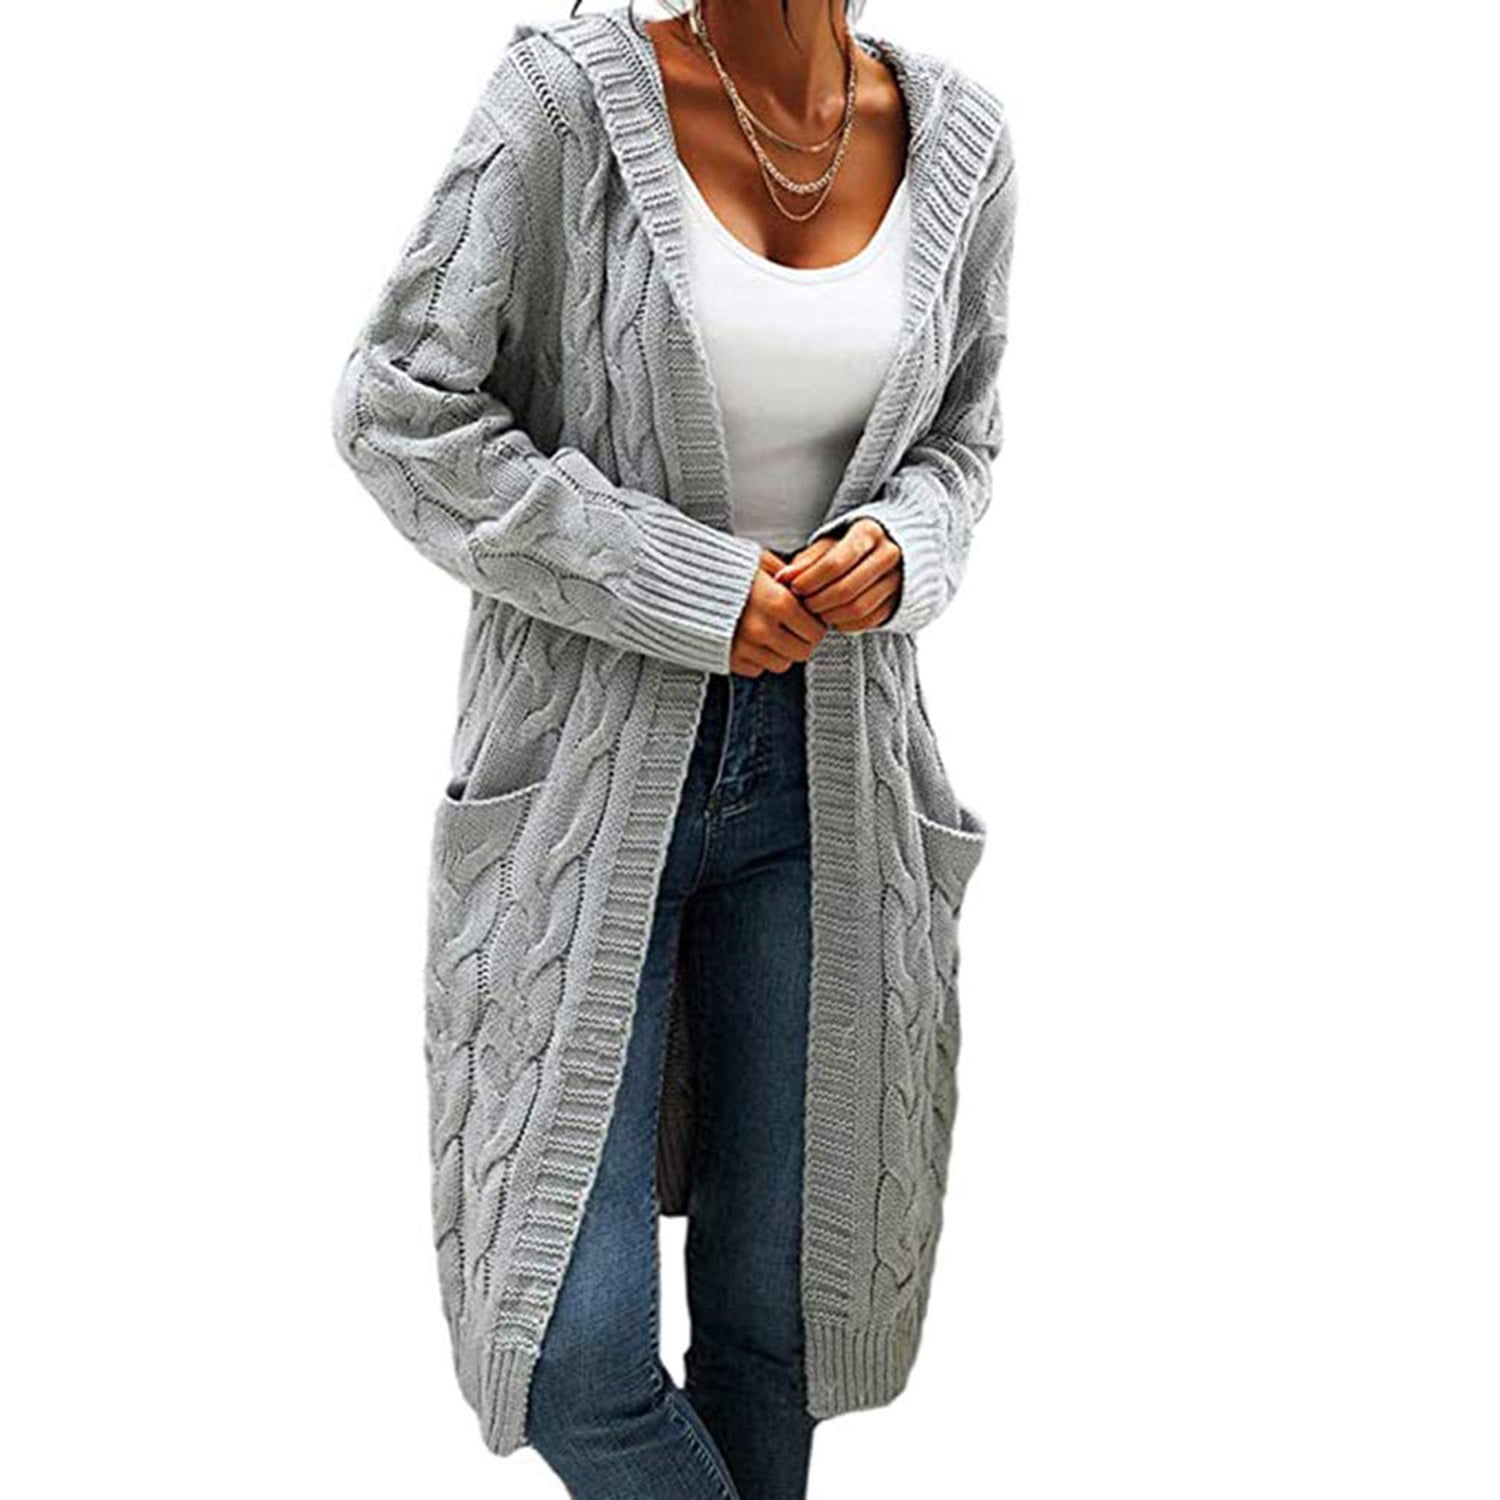 Mafulus Women Hooded Open Front Cardigan Cable Knit Sweaters Solid ...